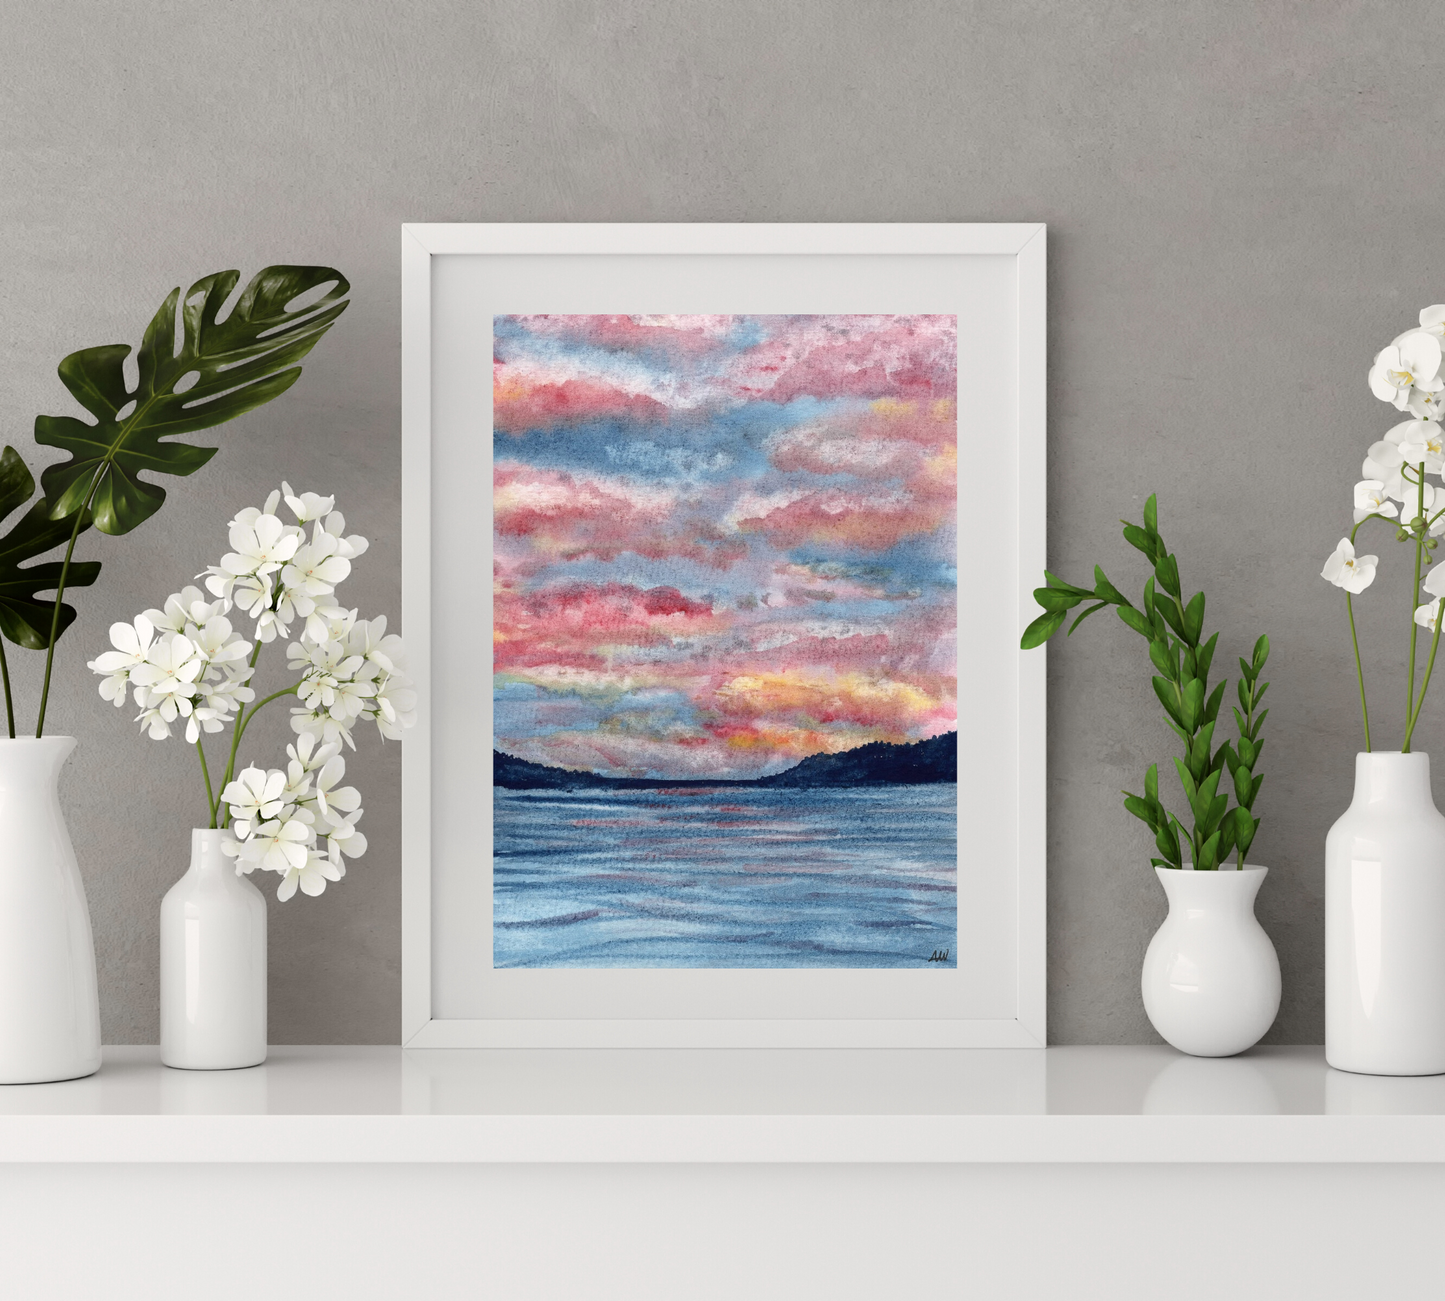 Cotton Candy Skies in Pen and Watercolor - Archival Quality Art Print